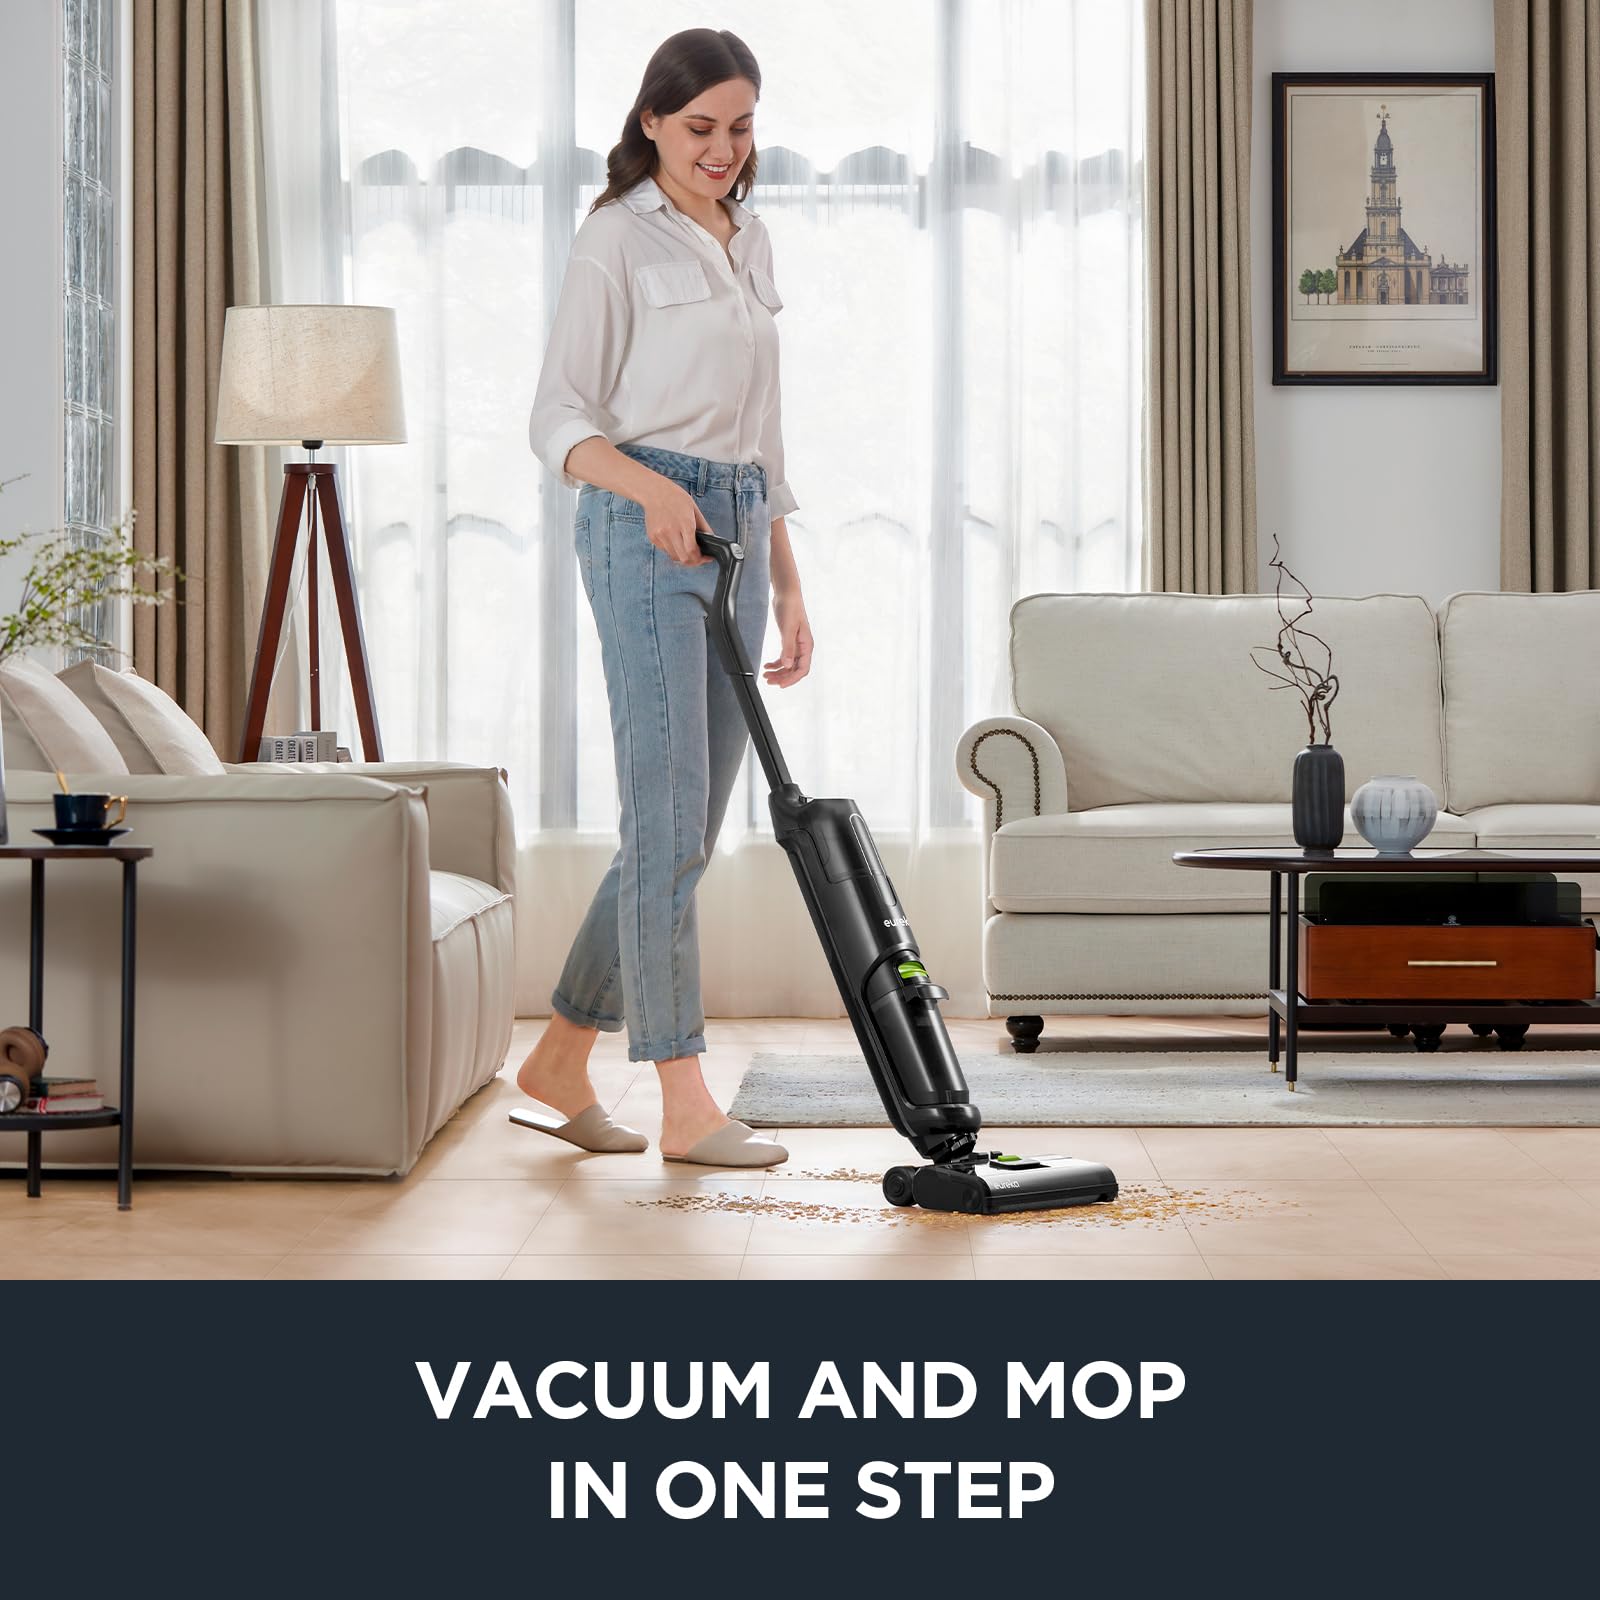 EUREKA NEW400 Cordless Wet Dry Vacuum All-in-One Mop, Hard Floor Cleaner with Self System, Effectively Multi-Surfaces, Perfect for Cleaning Sticky Messes, (Black), 8 lbs